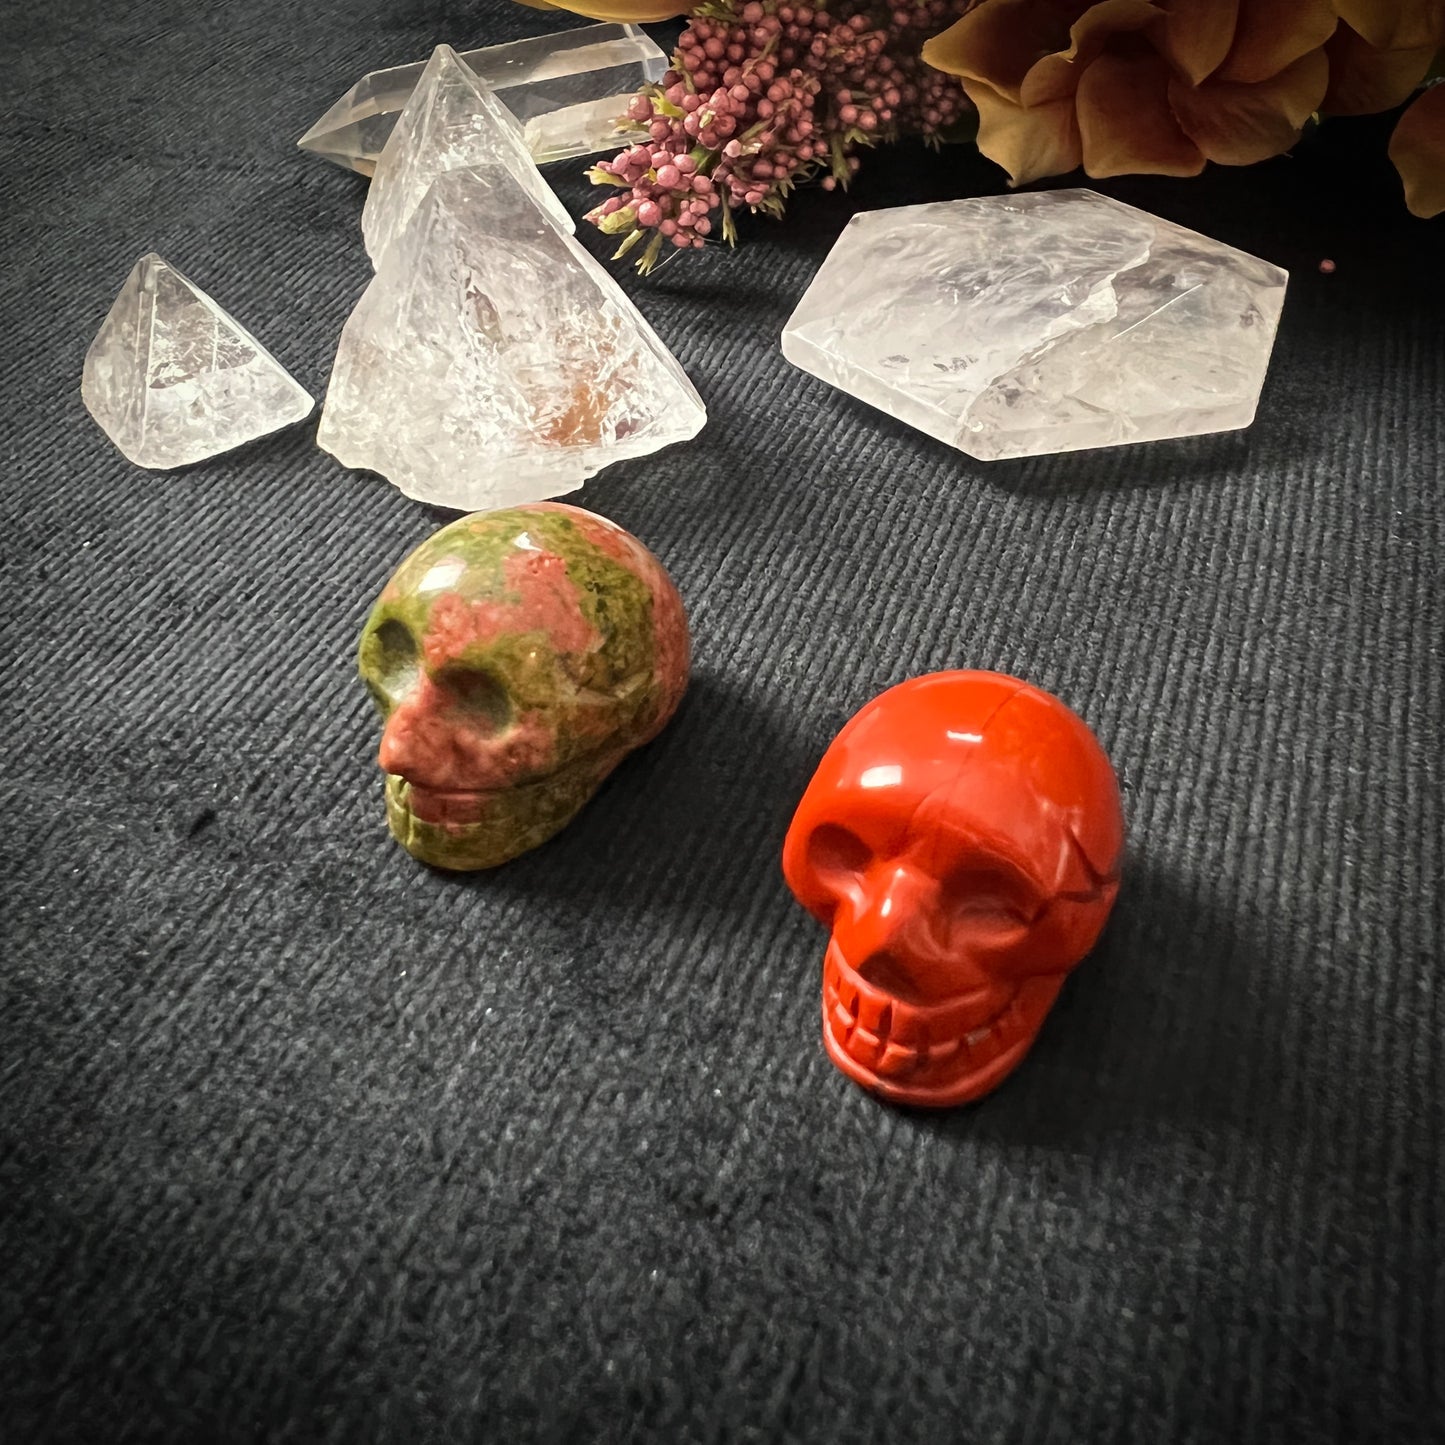 Tiny Red Jasper or Unakite gemstone skull amulet for altar, meditation, witchcraft - The French Witch shop